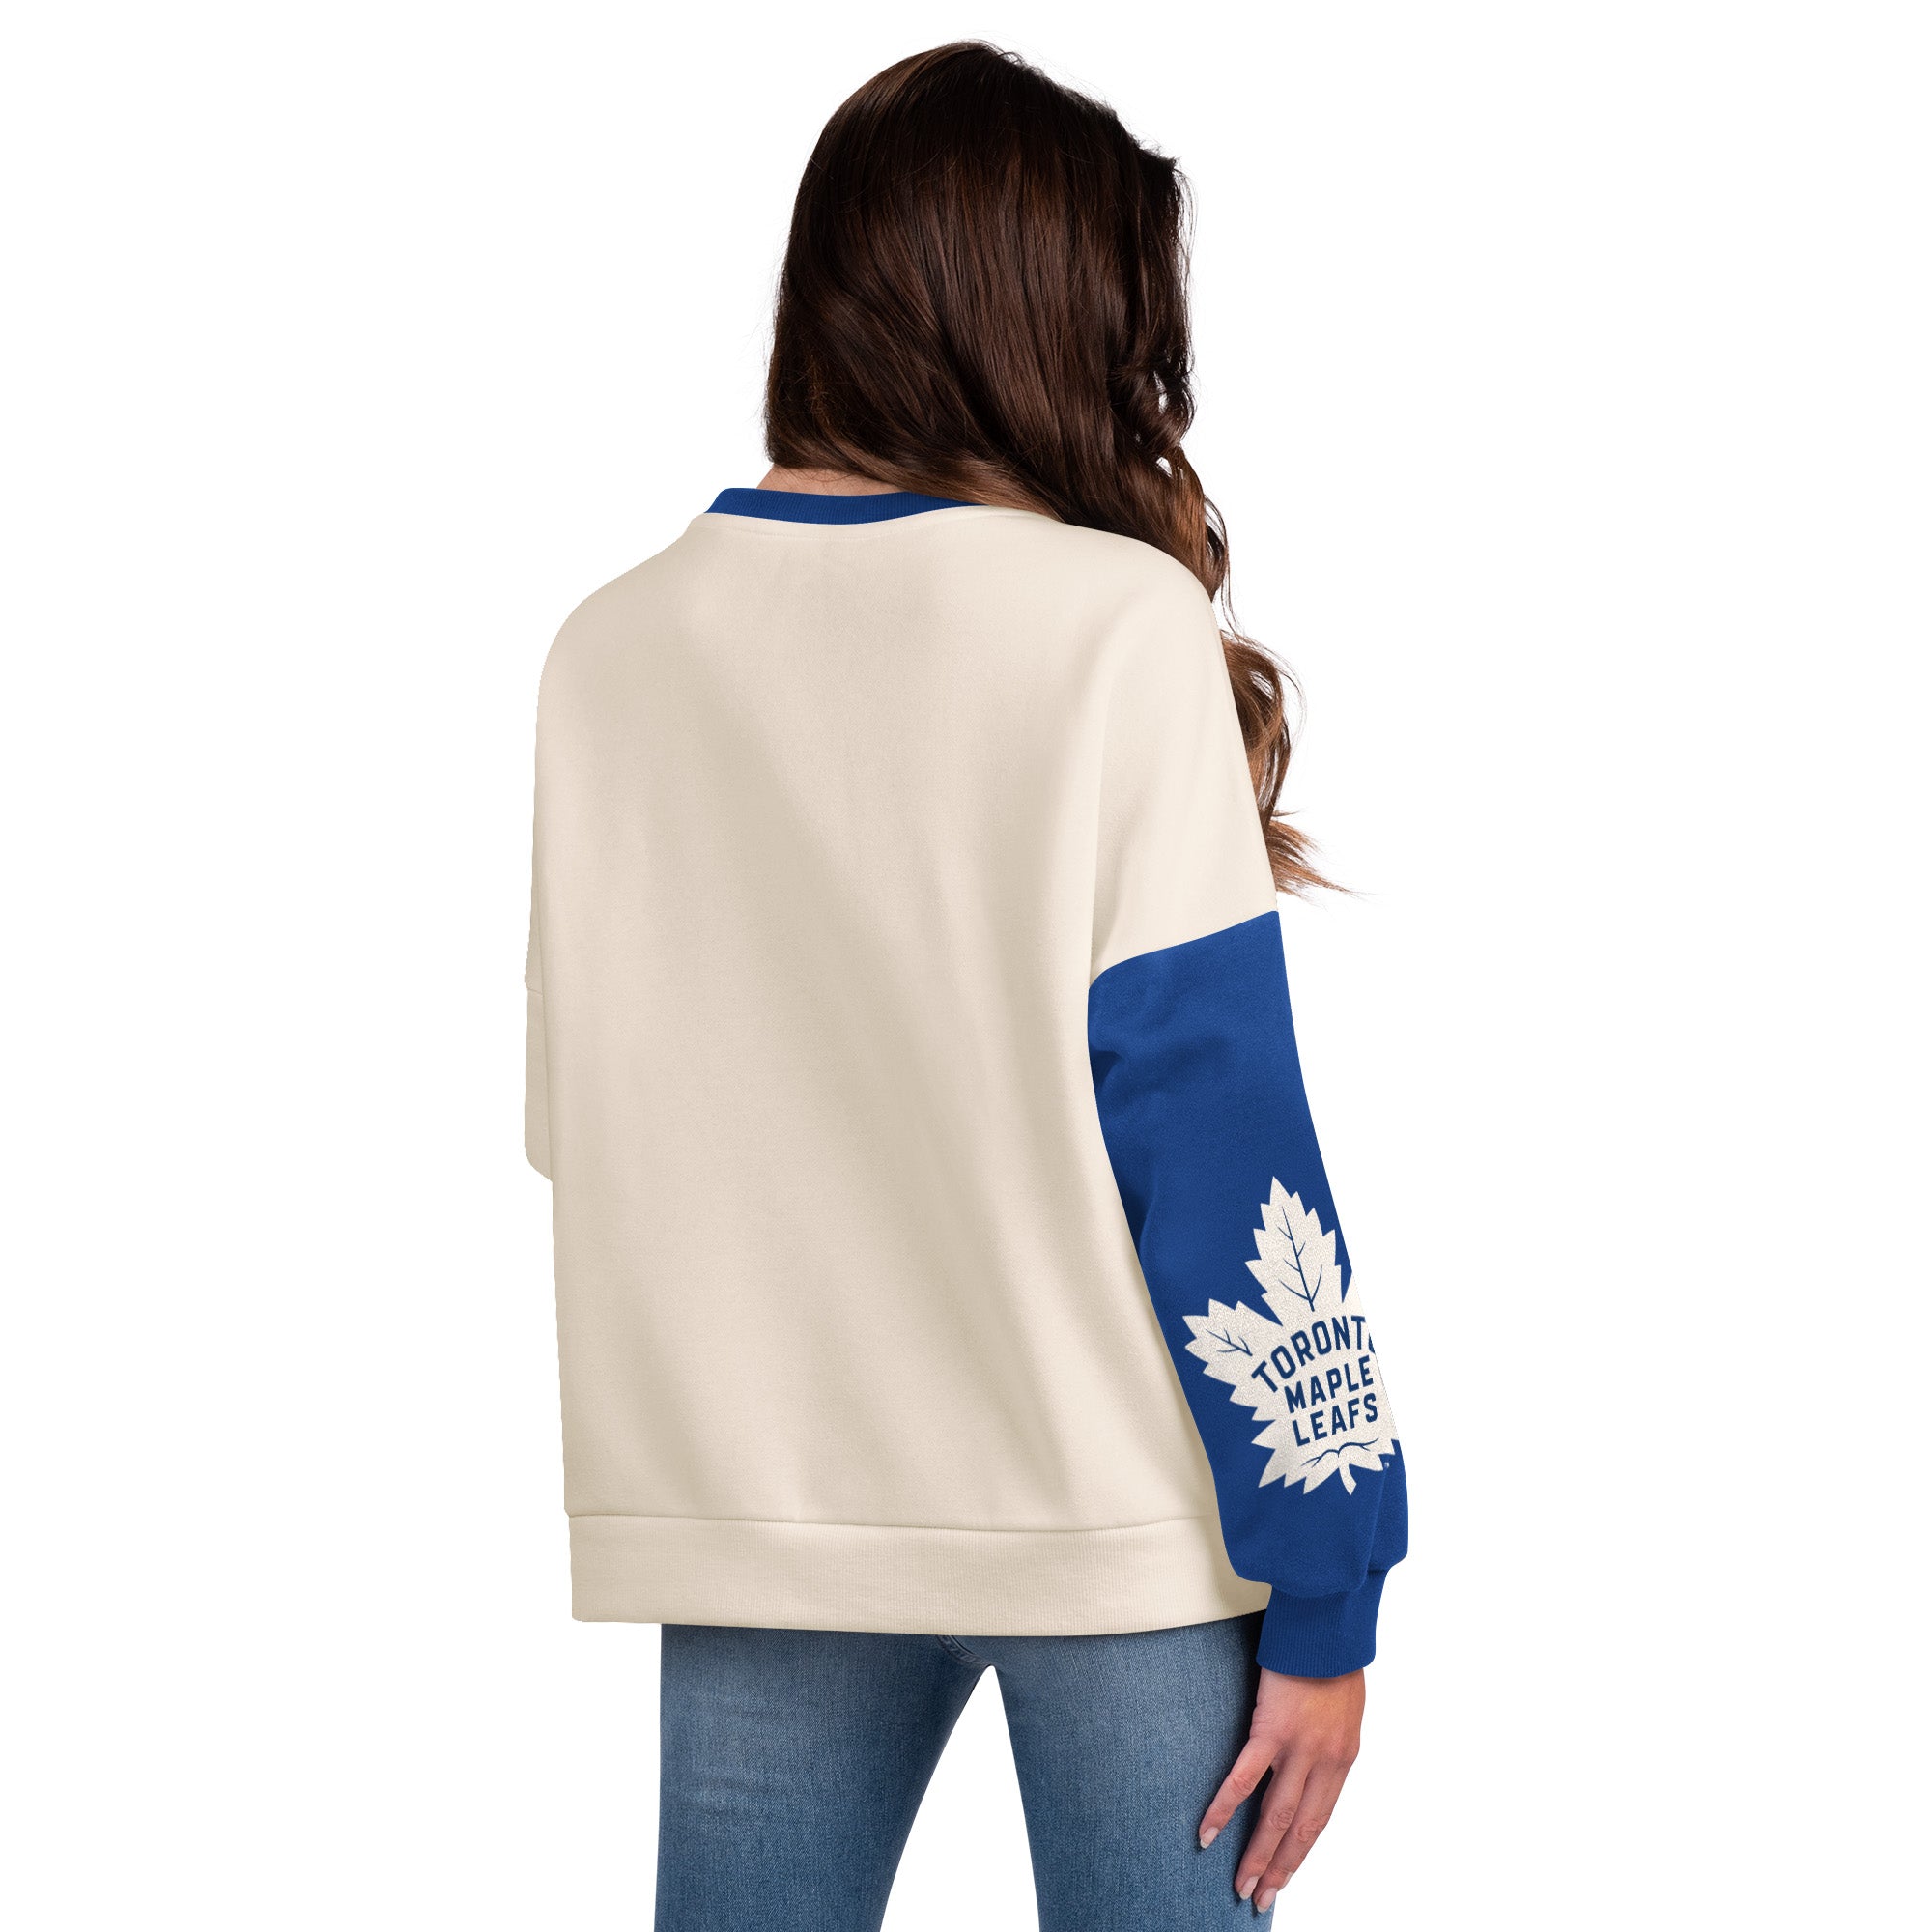 Toronto Maple Leafs tee shirt – Camp Connection